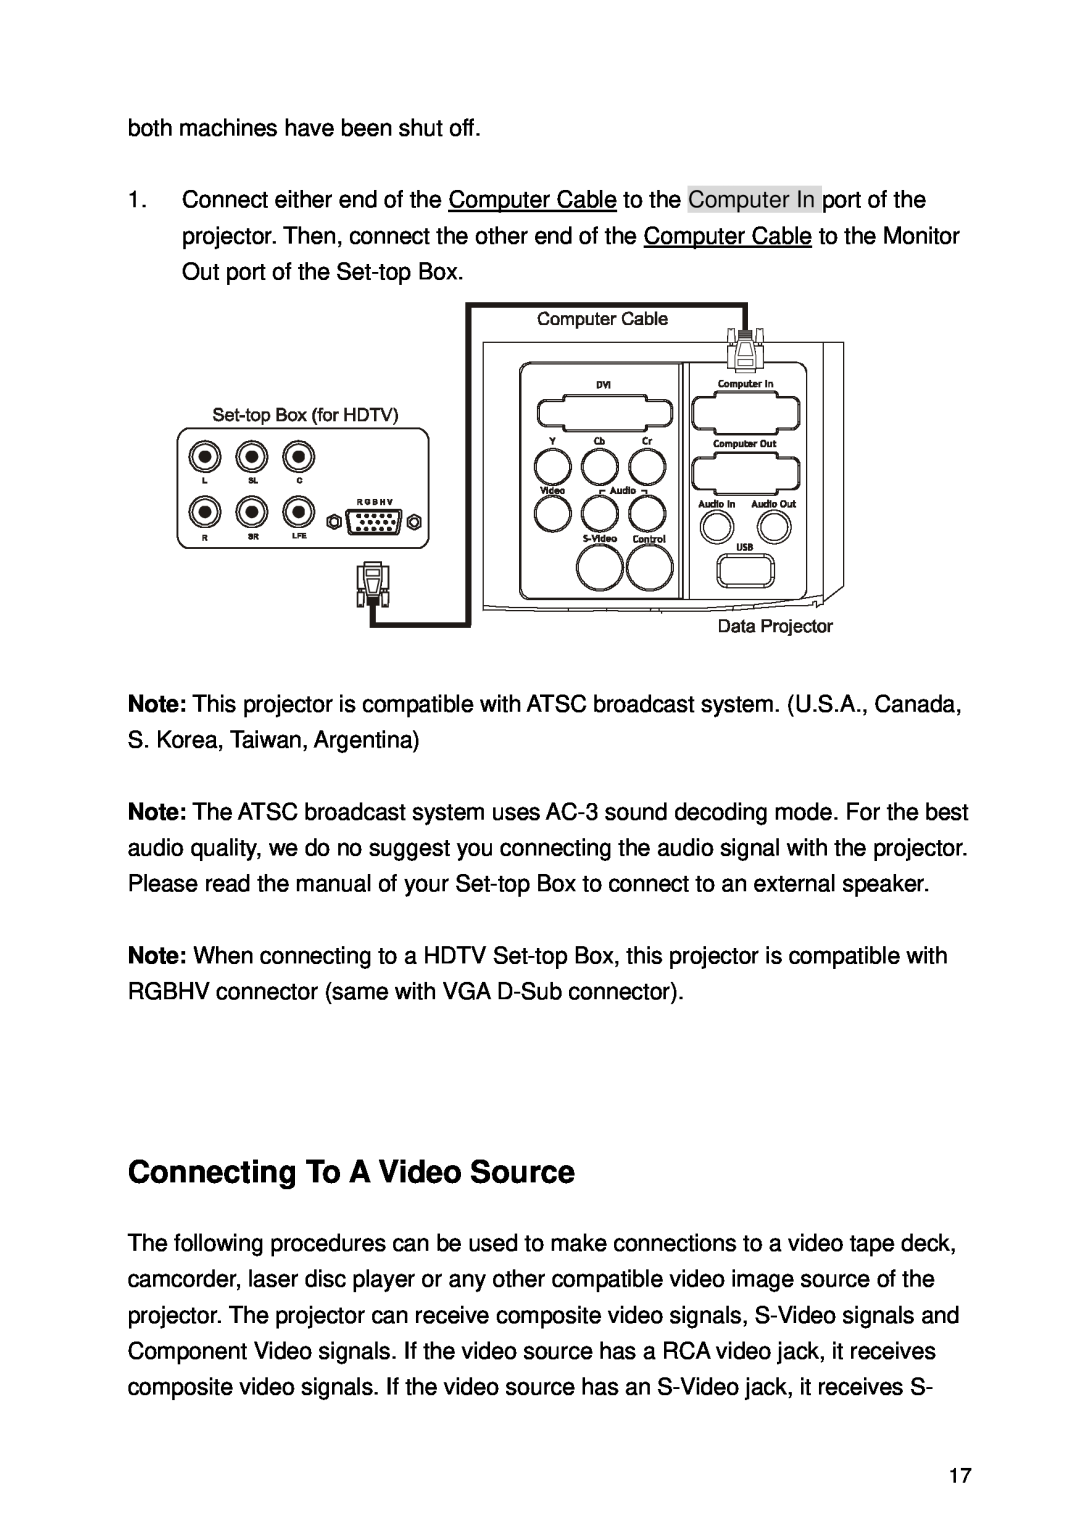 Microtek CX4 manual Connecting To A Video Source 